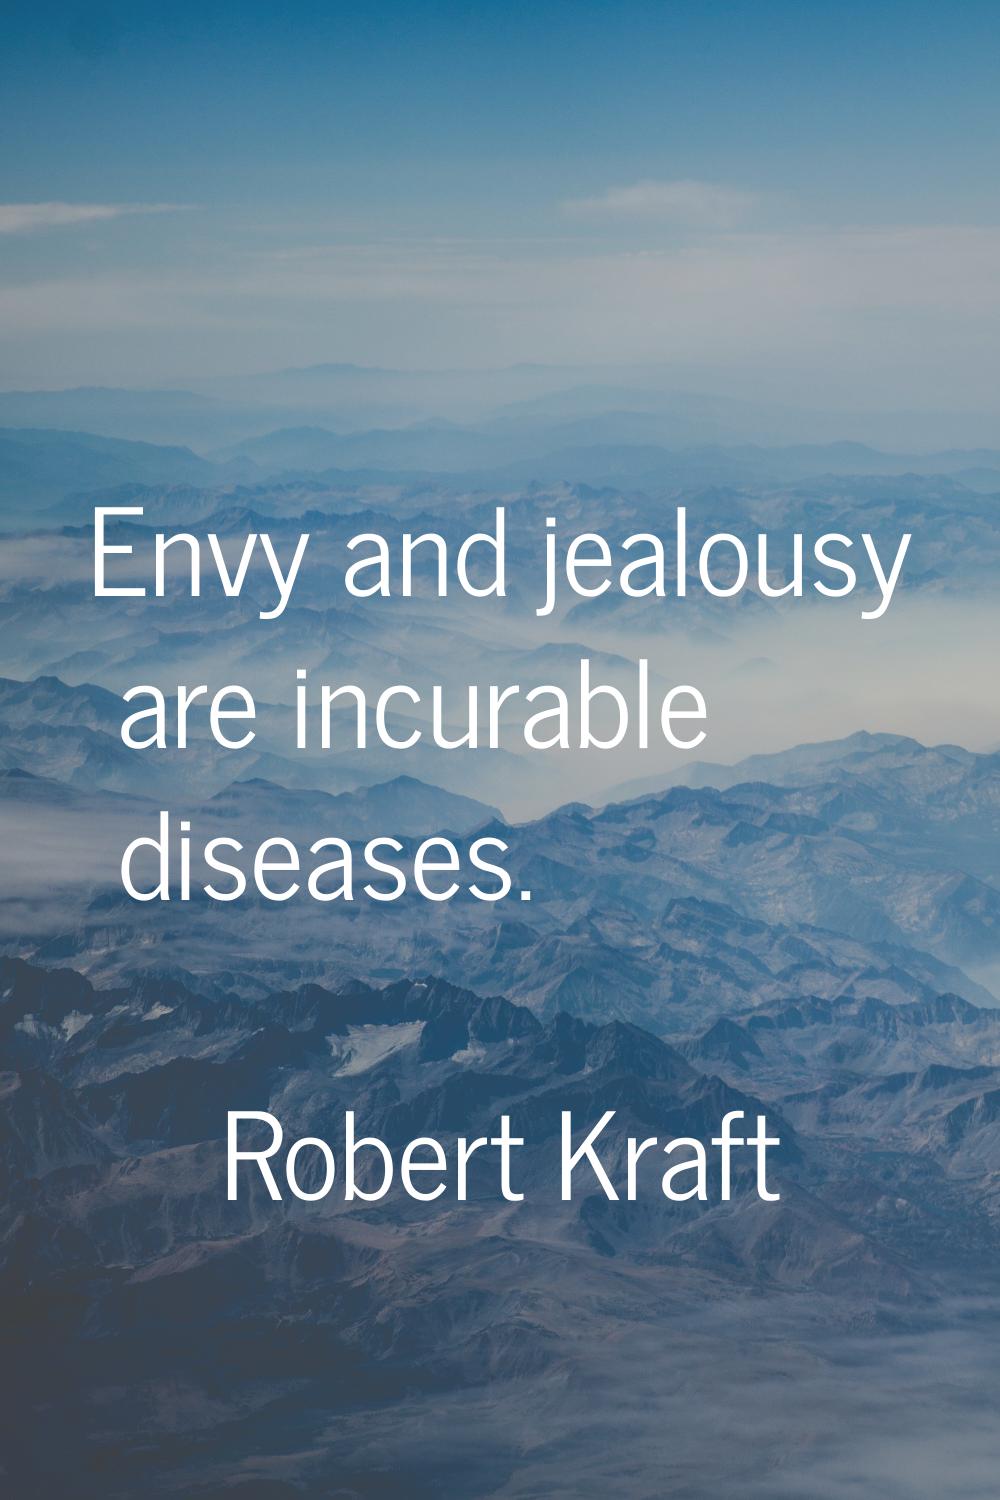 Envy and jealousy are incurable diseases.